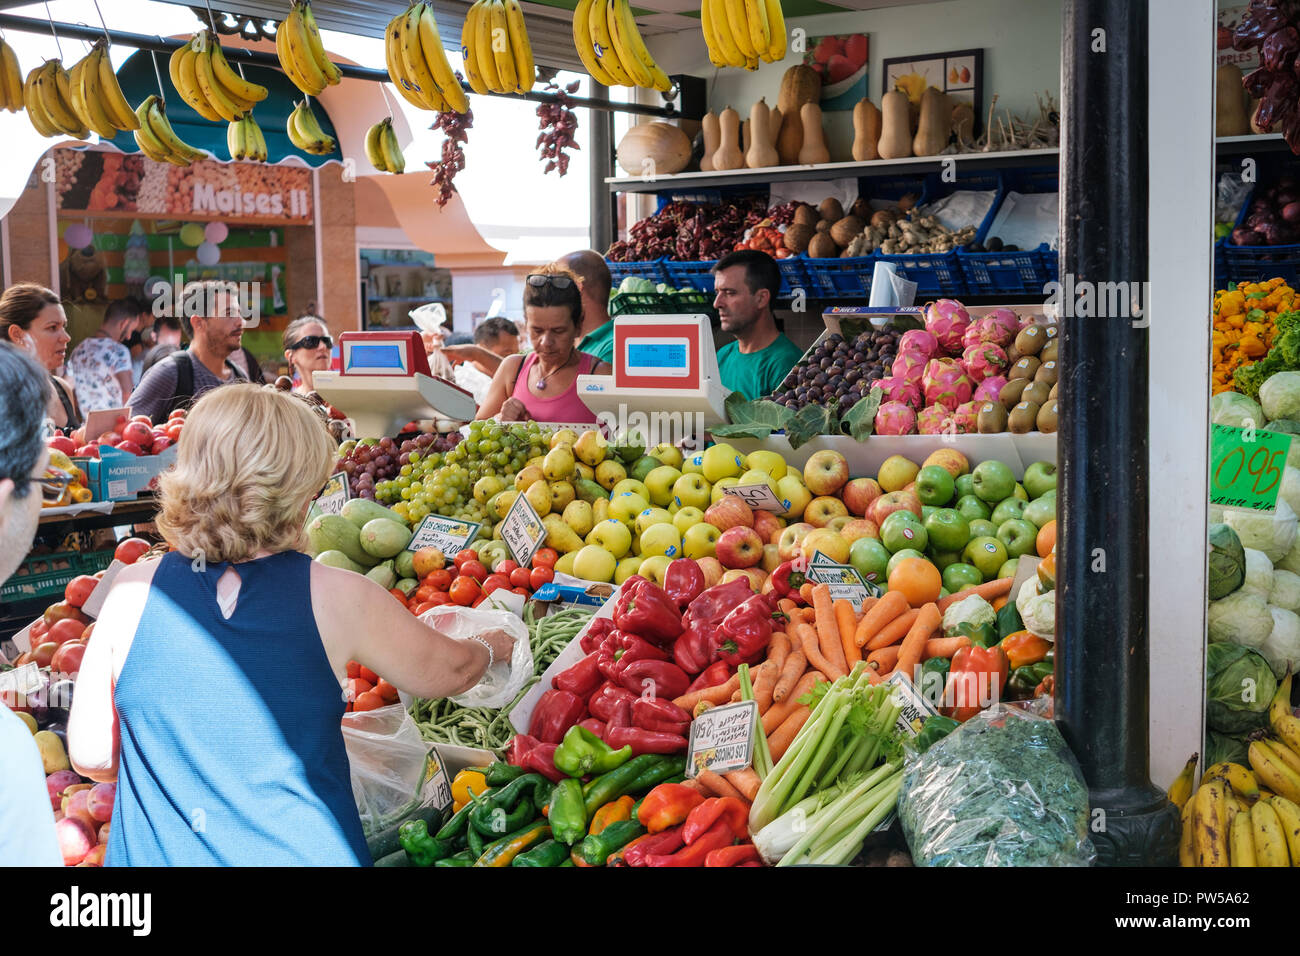 Santa Cruz de Tenerife, Canary Islands, Spain - September 2018: People buying fruits and vegetables at food market Municipal Market Our Lady of Africa Stock Photo